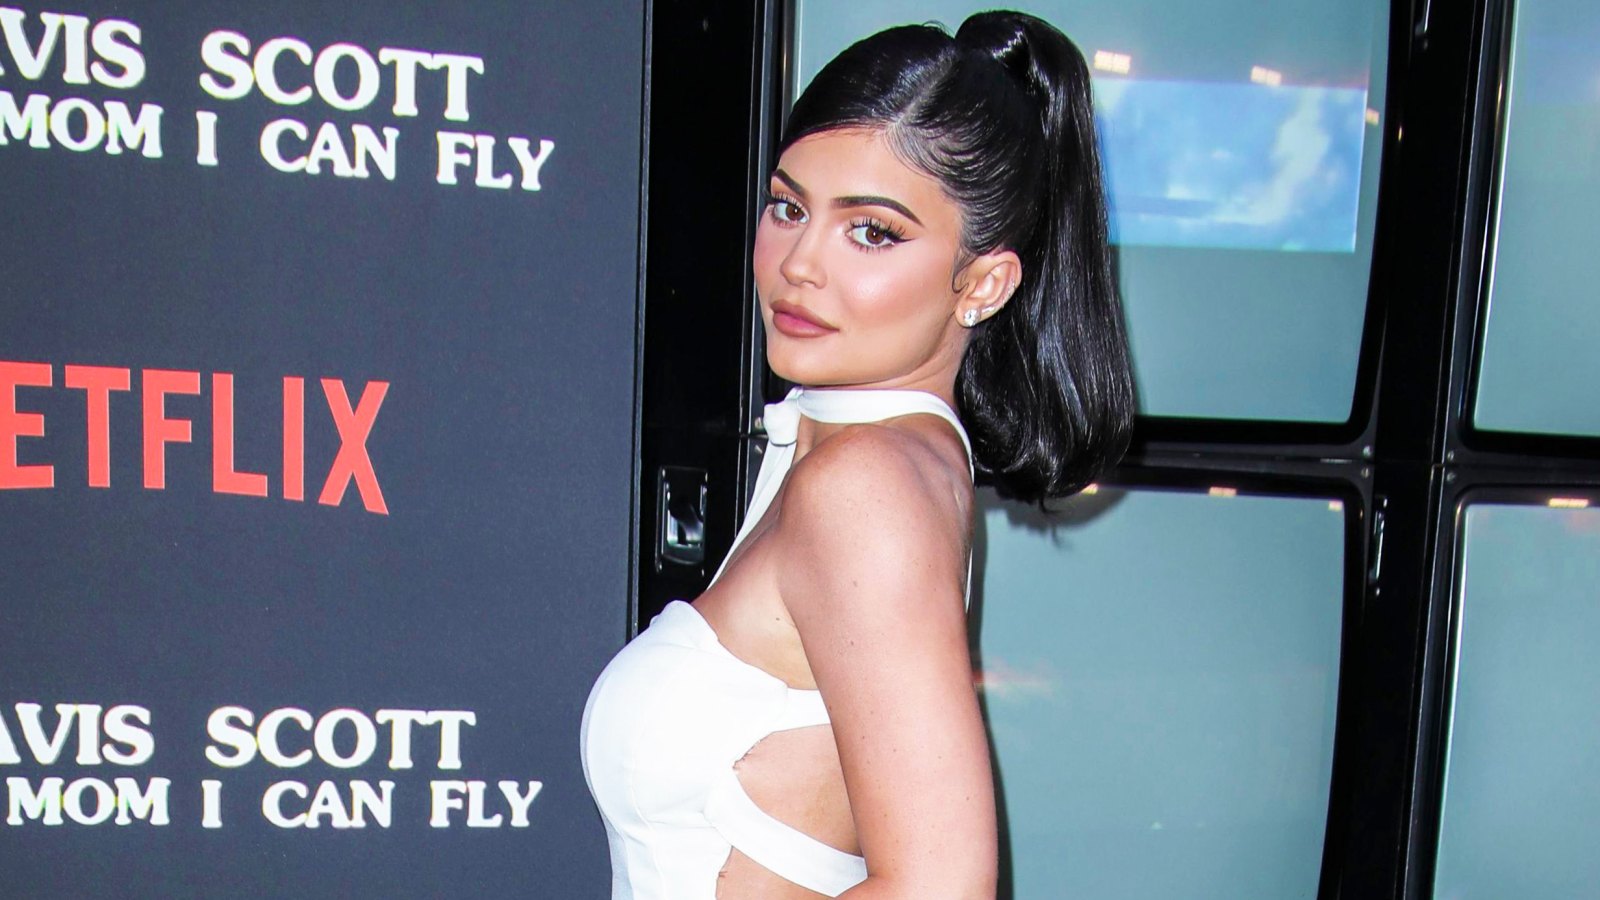 Kylie Jenner Says Her Nude Photos Wouldn't Get Leaked Because She Doesn't Send Any